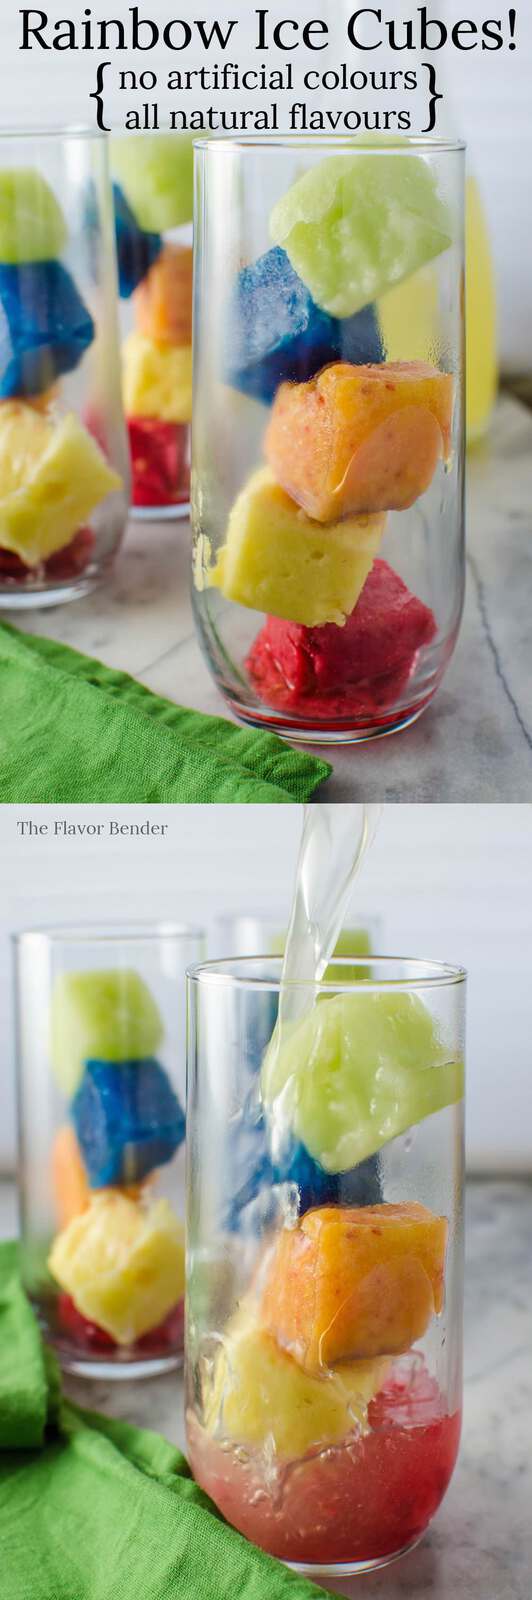 Rainbow Ice Cubes - Make your drinks like your favourite lemonade, fun with these Rainbow Ice Cubes all made with natural colours and flavours to add more fruityness to your rainbow lemonade!